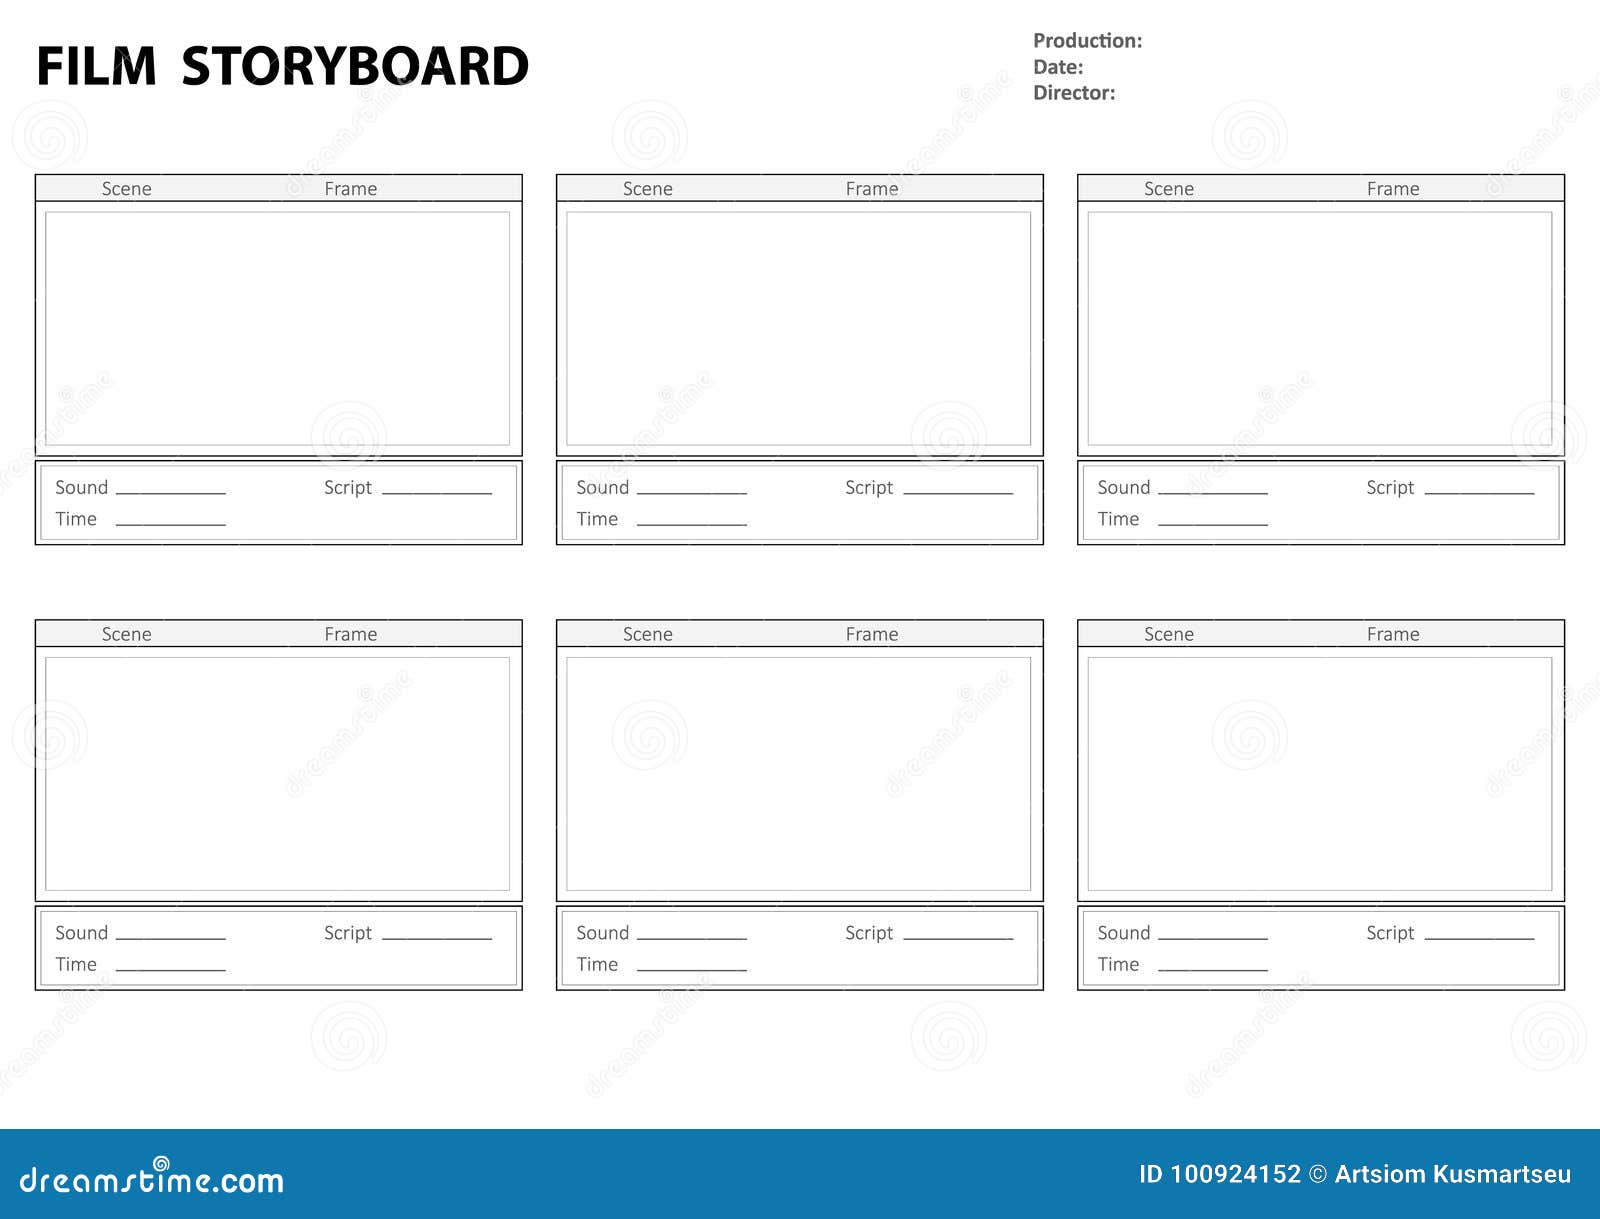 Professional Film Storyboard Template from thumbs.dreamstime.com